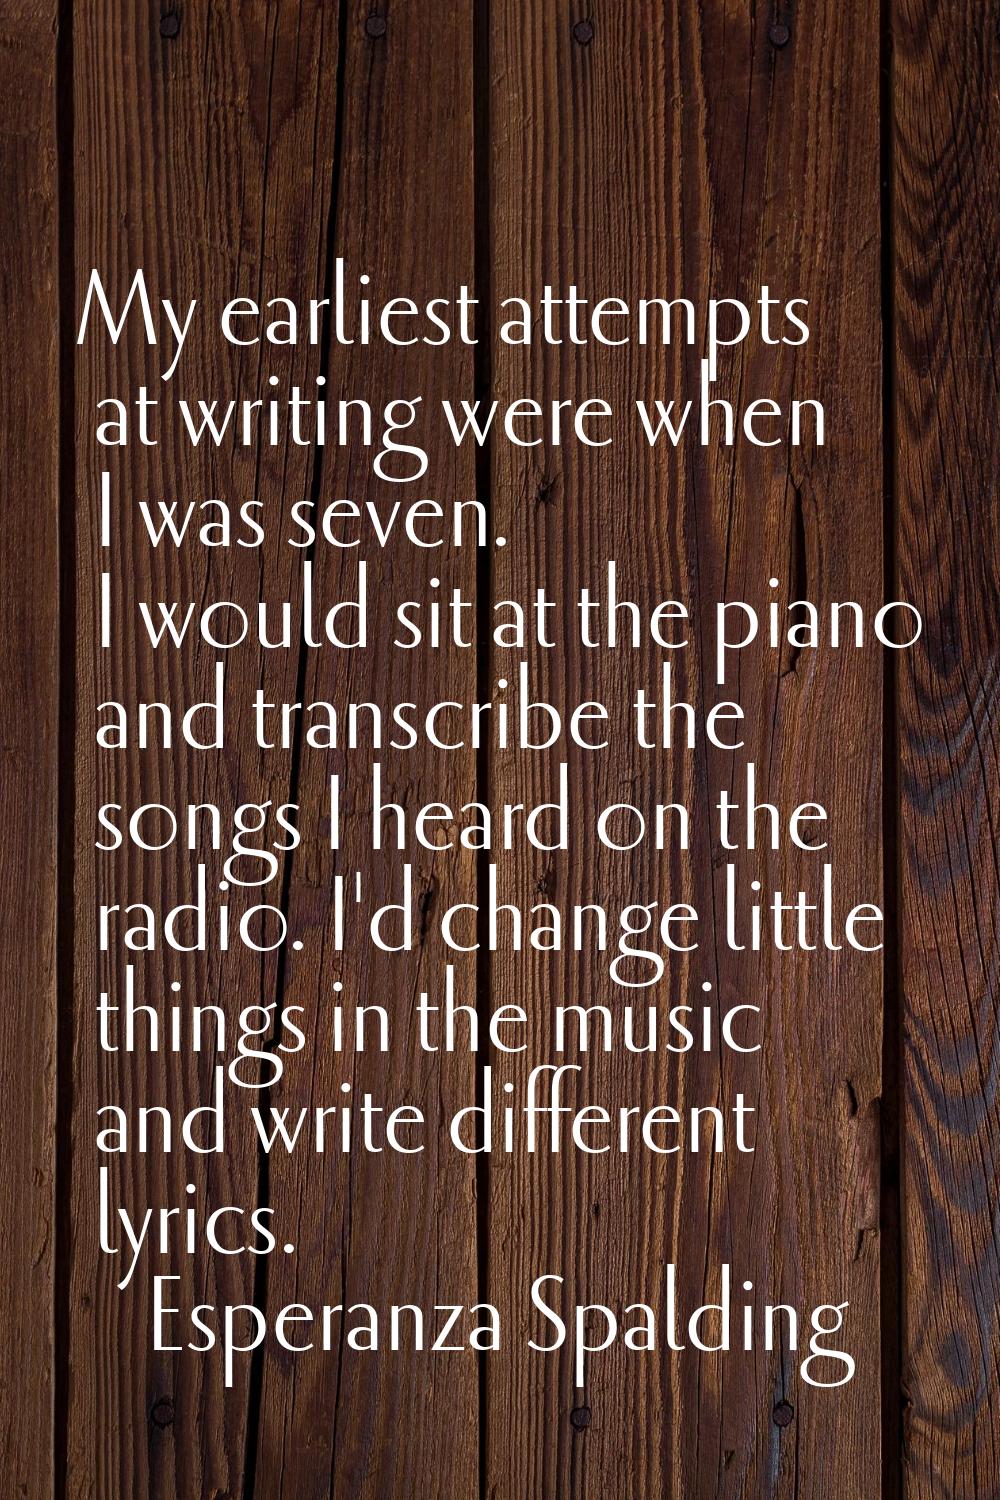 My earliest attempts at writing were when I was seven. I would sit at the piano and transcribe the 